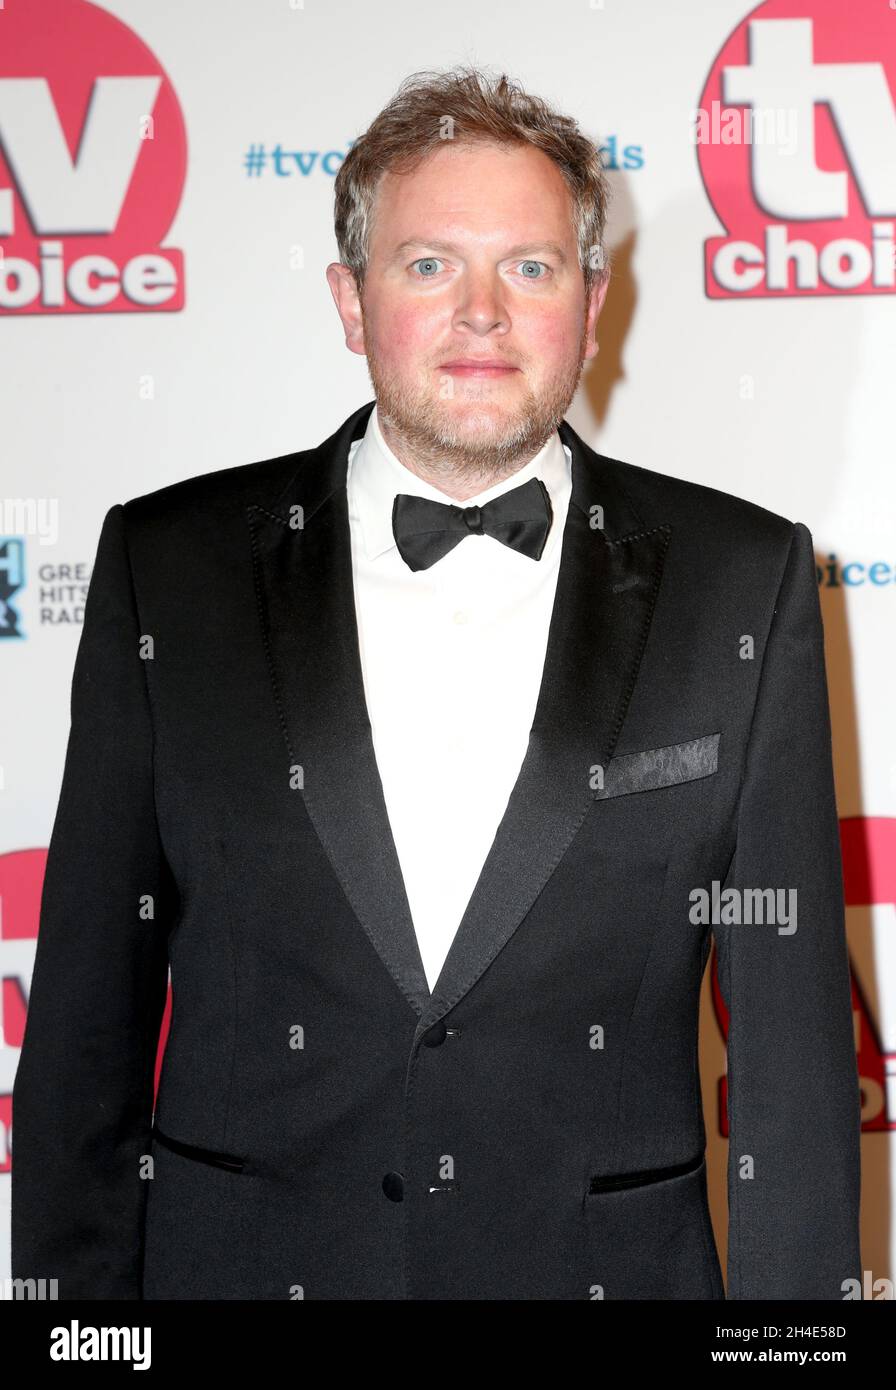 Miles Jupp attending the TV Choice Awards held at the Hilton Hotel, Park Lane, London Stock Photo